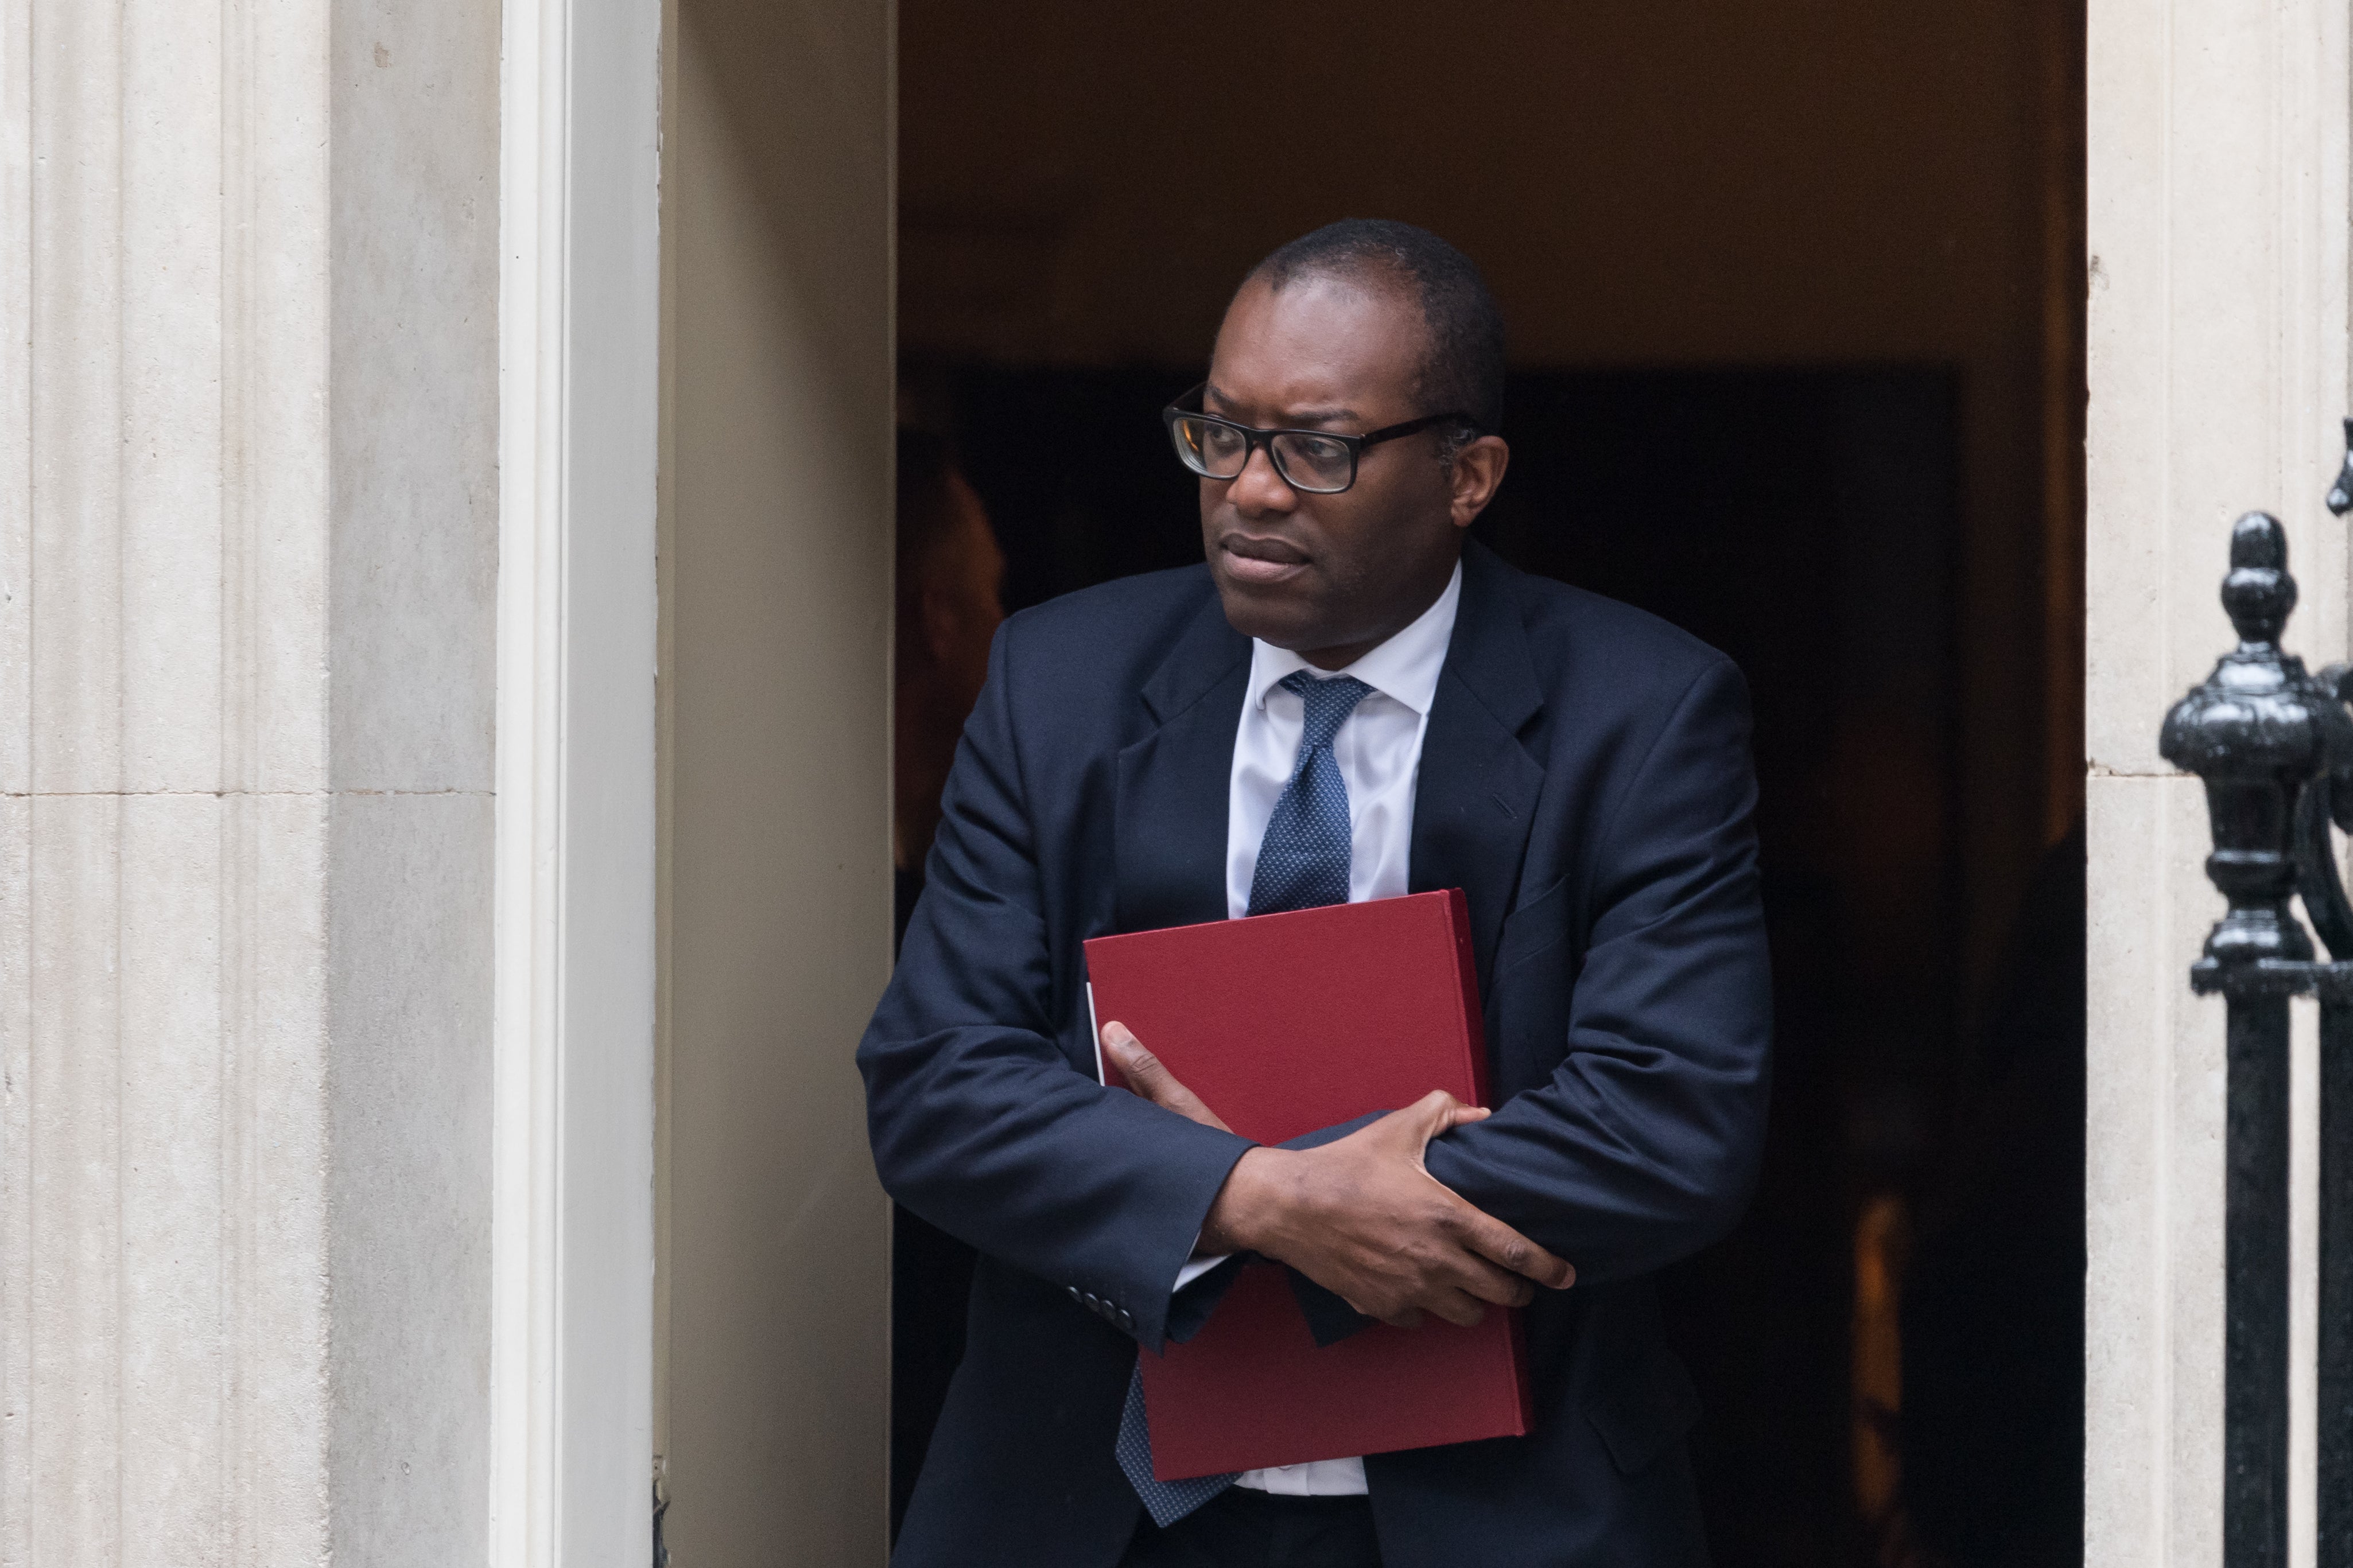 The business secretary, Kwasi Kwarteng said on Monday that the UK had enough energy supplies to avoid any emergency measures